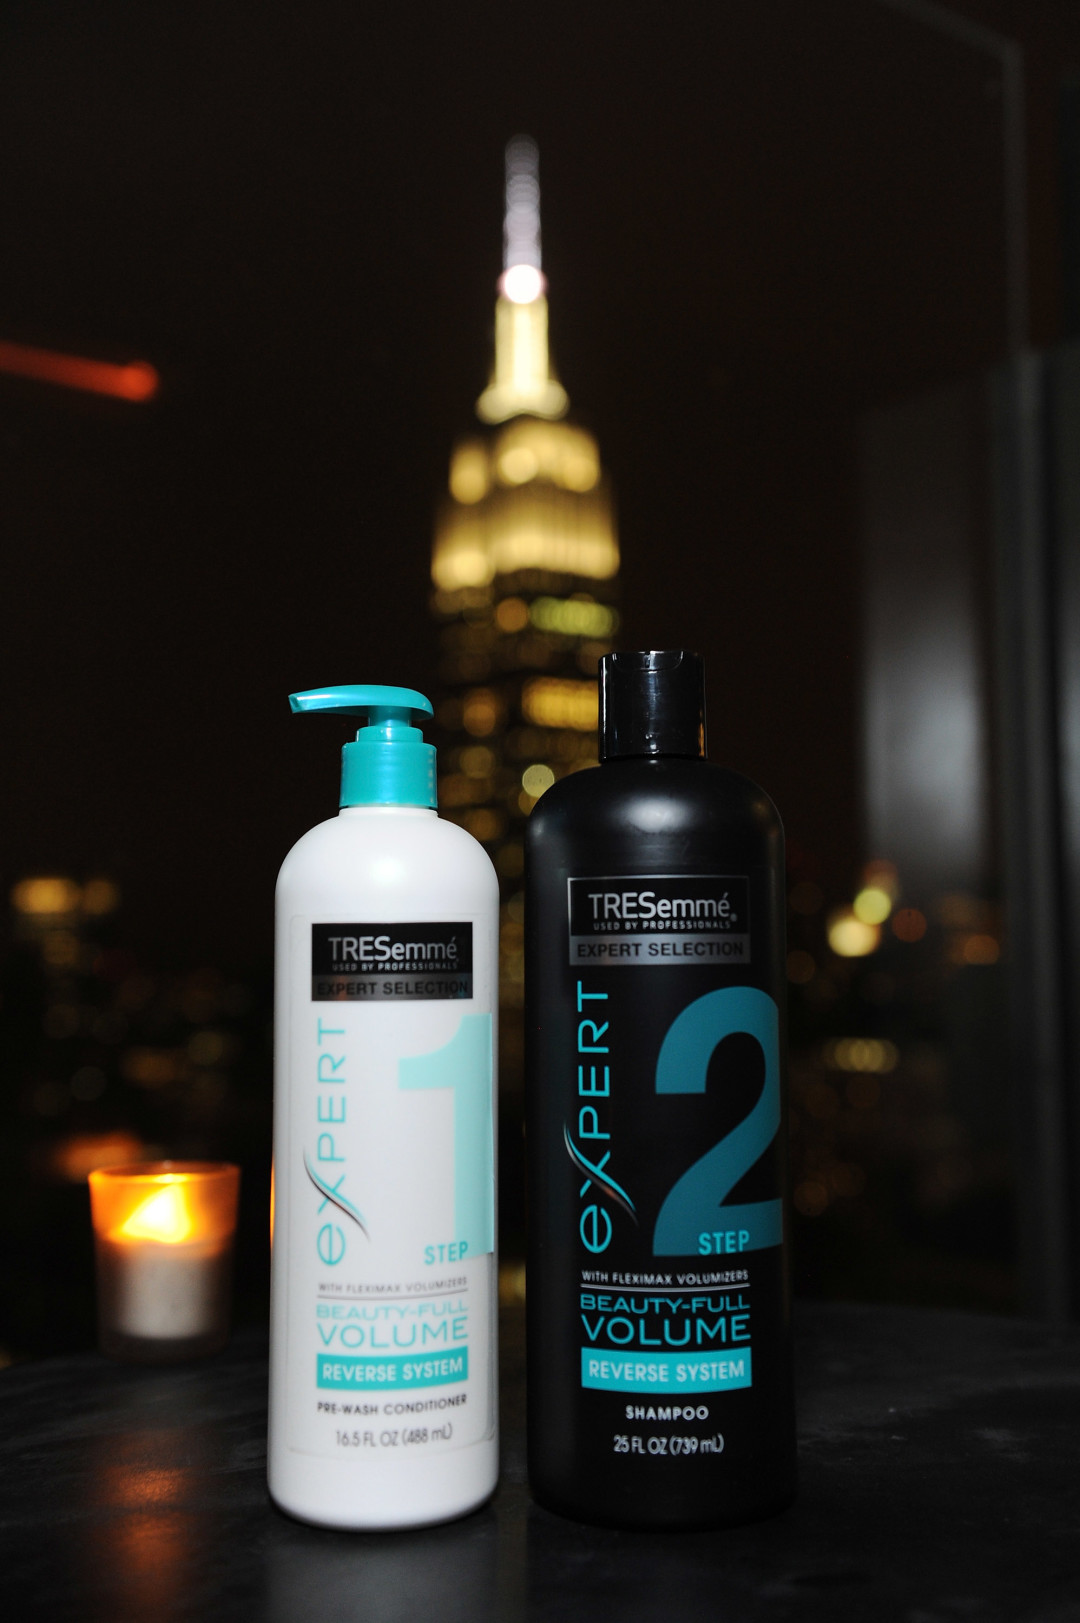 NEW YORK, NY - FEBRUARY 12: TRESemme products on display during the TRESemme Beauty-Full Volume Launch Party With Chrissy Teigen at The Skylark on February 12, 2016 in New York City. (Photo by Craig Barritt/Getty Images)